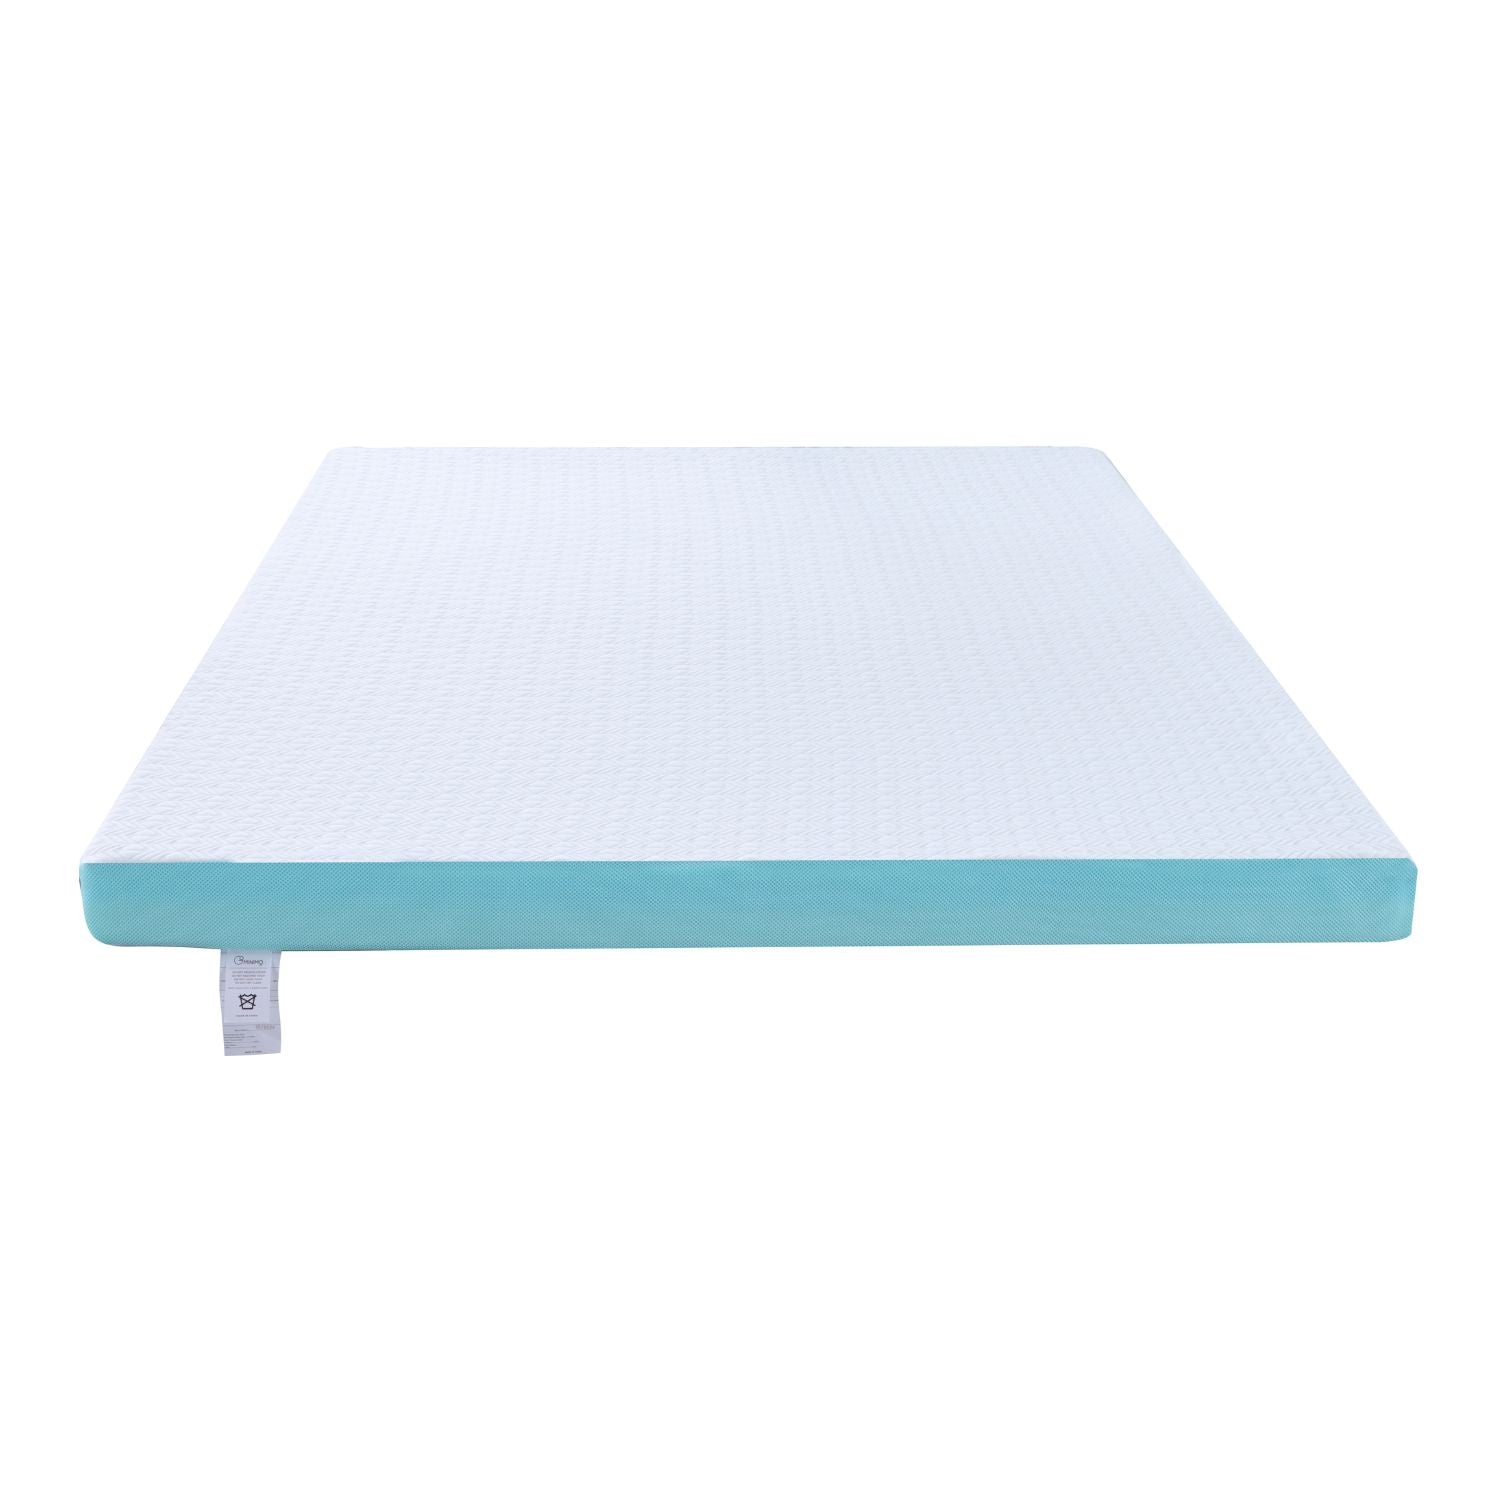 GOMINIMO Dual Layer Mattress Topper 4 inch with Gel Infused (Full)